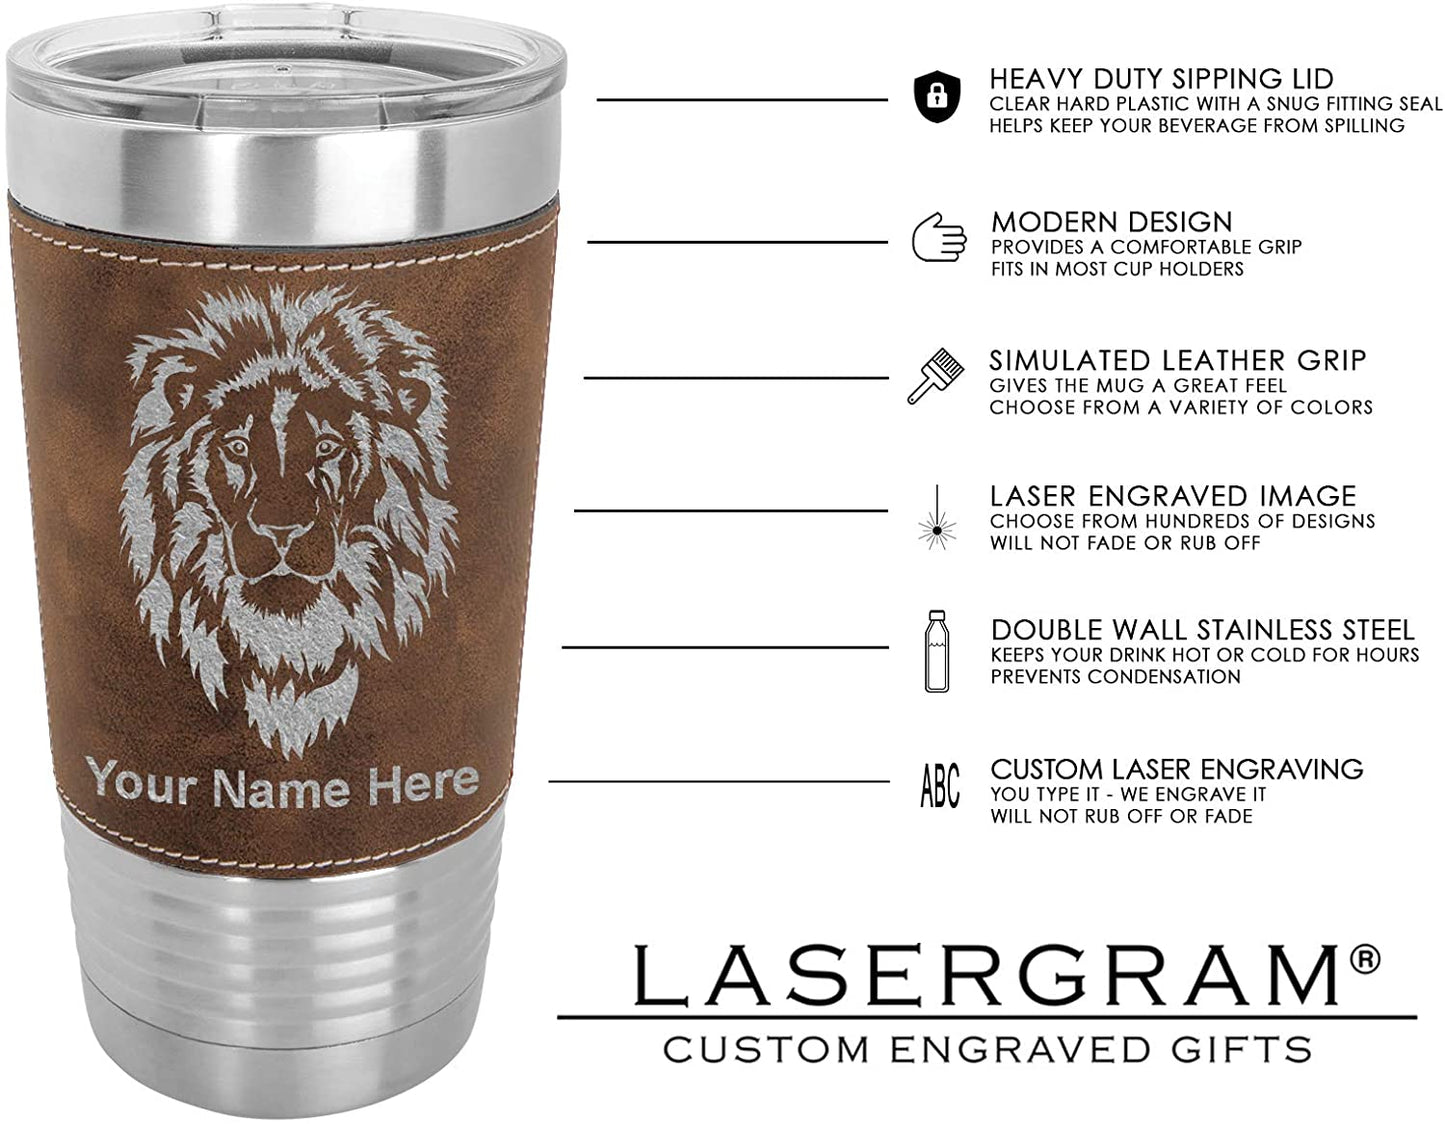 20oz Faux Leather Tumbler Mug, Dragonfly, Personalized Engraving Included - LaserGram Custom Engraved Gifts